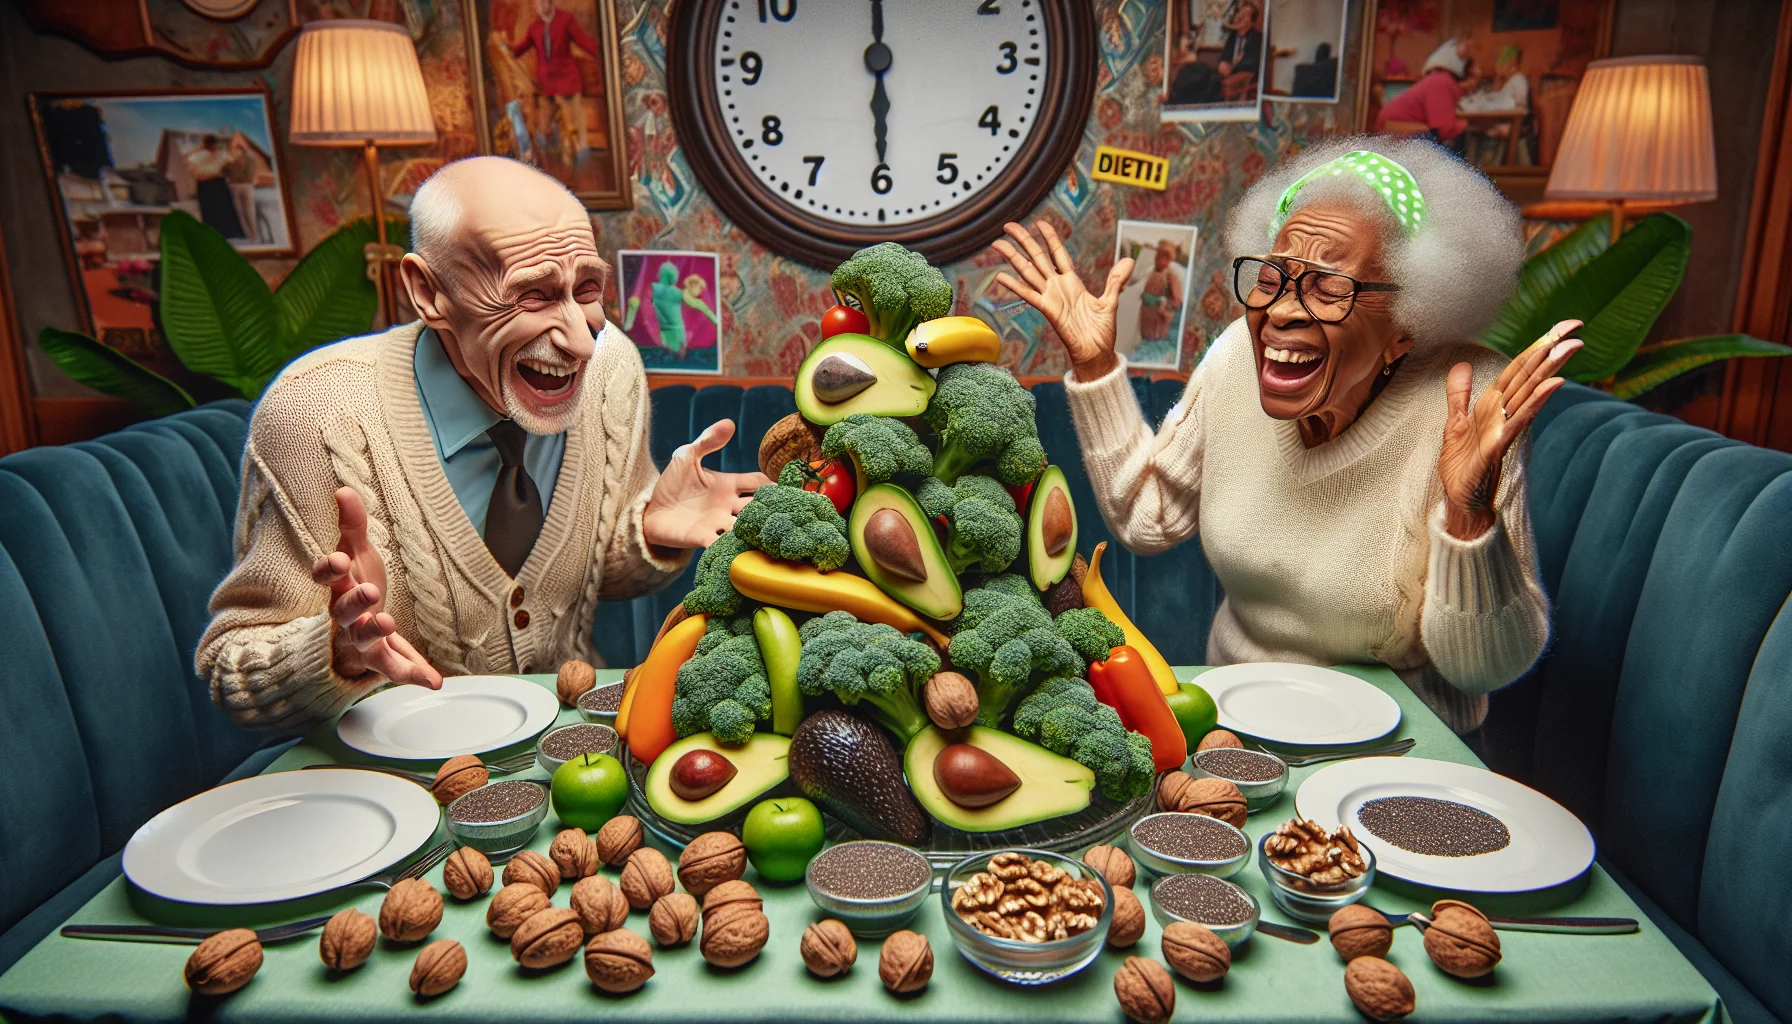 Create a humorously realistic image showing a variety of keto-friendly foods that are high in fiber. These foods could include avocados, broccoli, walnuts, chia seeds, and other such items. Now, place this smorgasbord of healthy foods in a unique setting: an entertainingly themed elderly couple's dining room, where the decor sparks fun conversations about diets and healthy eating. This elderly couple, one Caucasian gentleman and one Black lady, is laughing as they take in the spectacle of it all. They're playfully arguing over who gets to eat the last piece of avocado on the table.